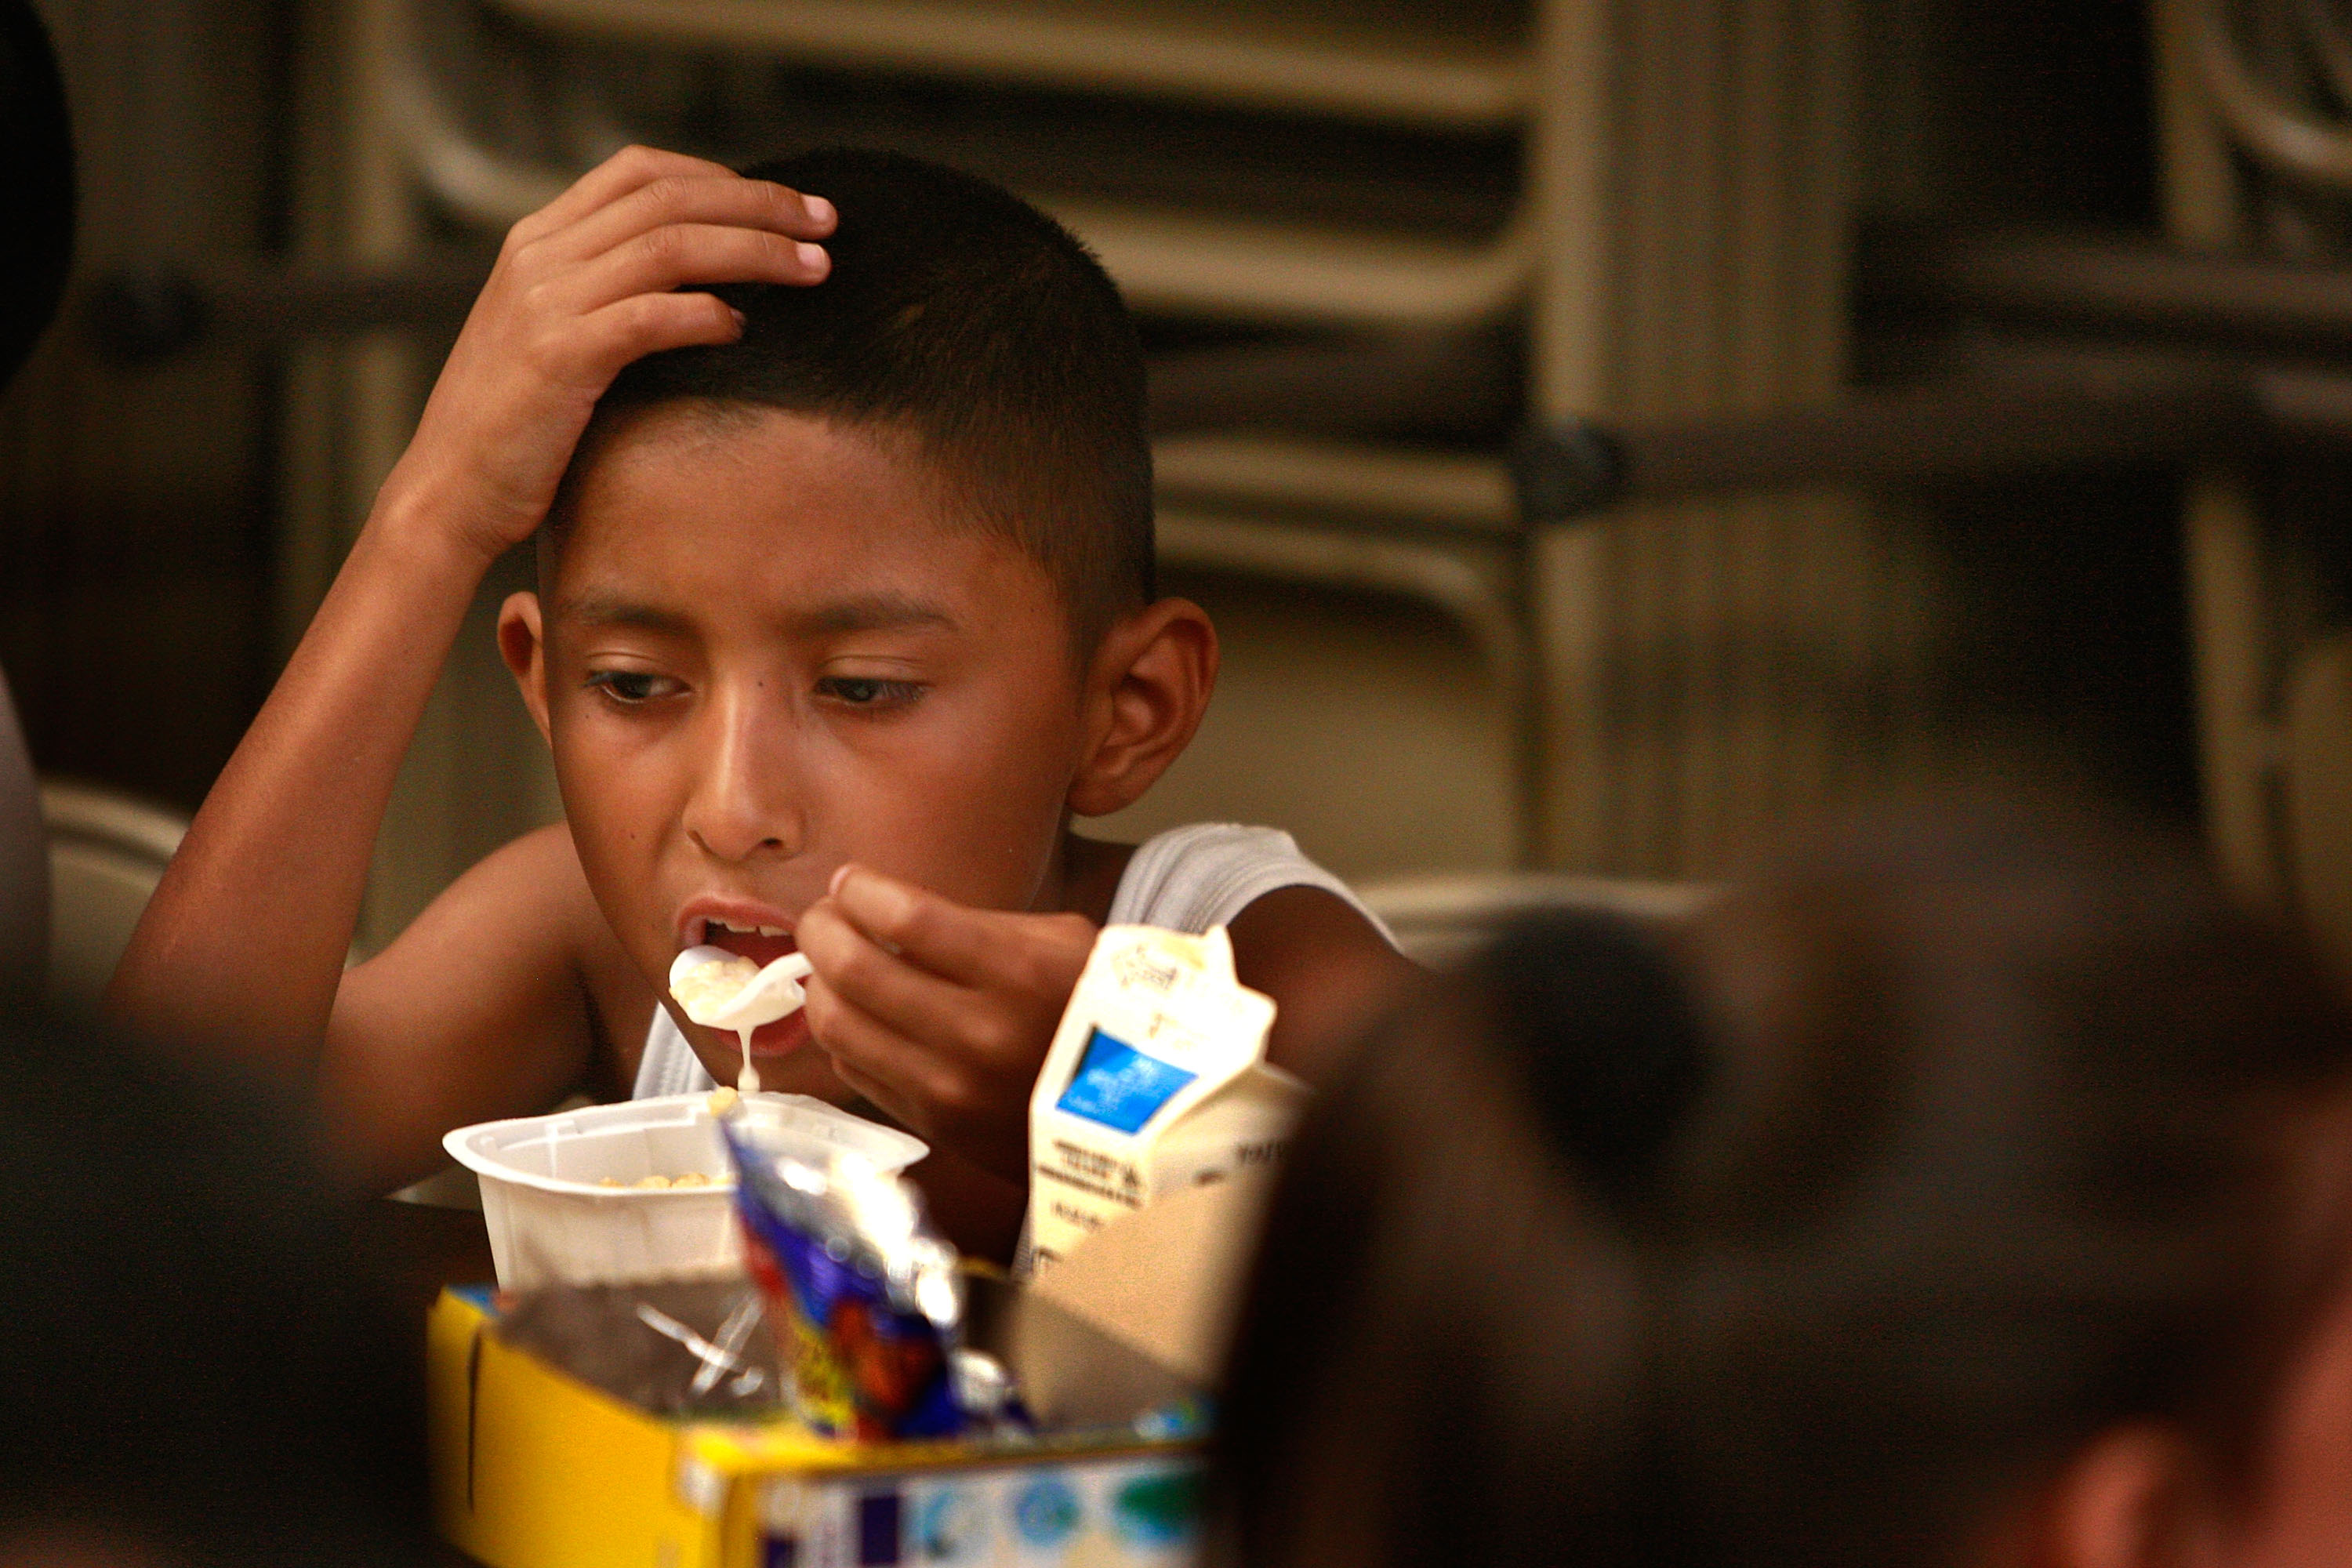 As School Ends For Summer, The Need For Free Meals For Children Remains